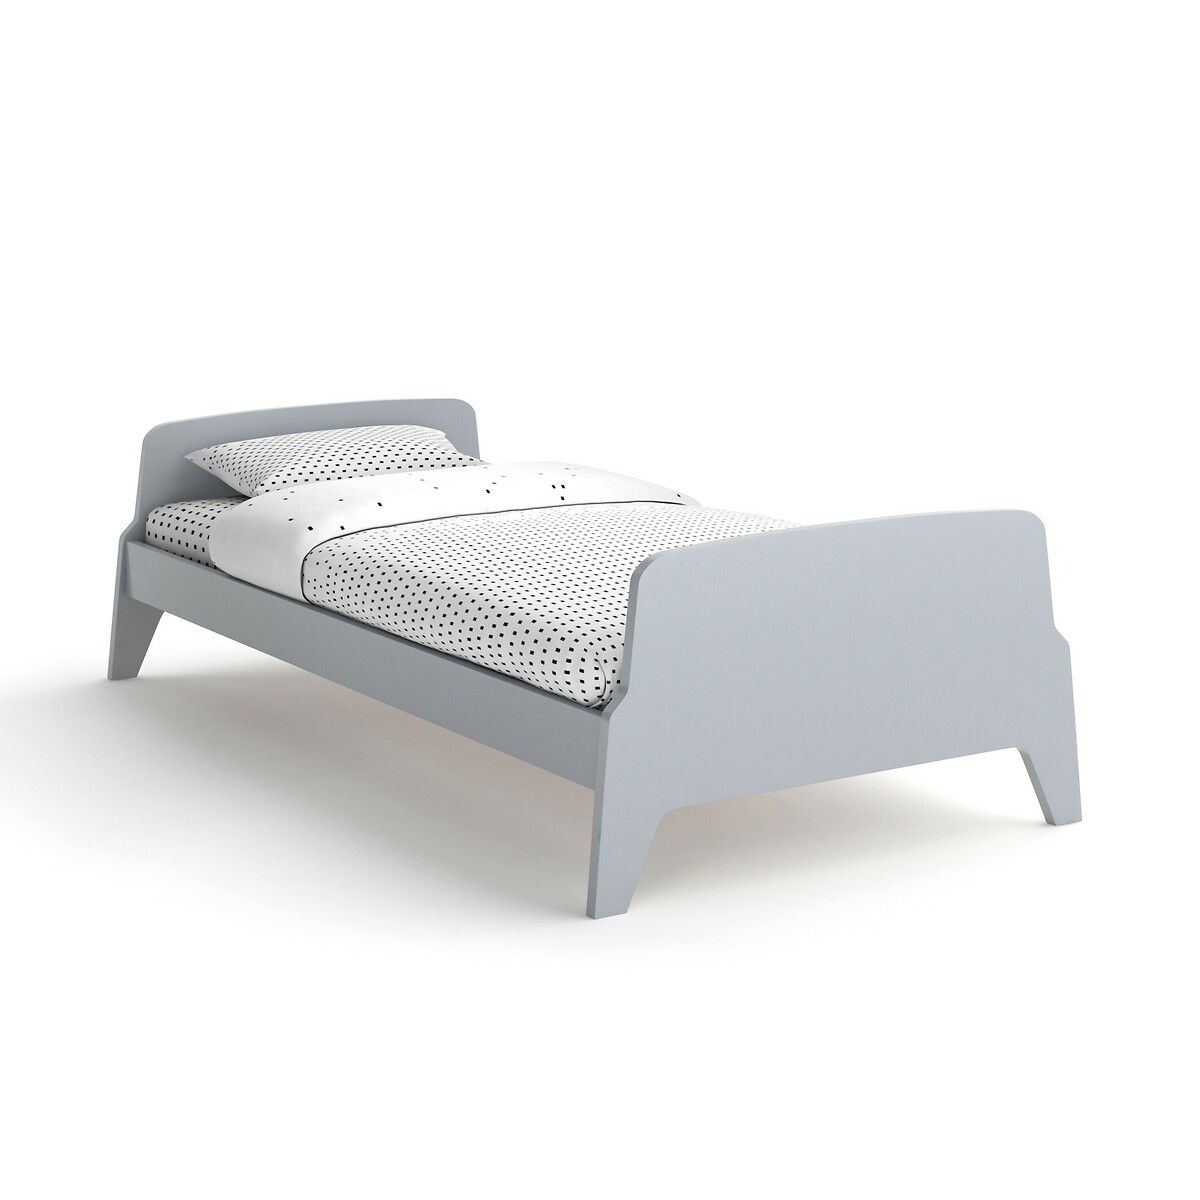 Adil Vintage Retro Style Single Bed with Base